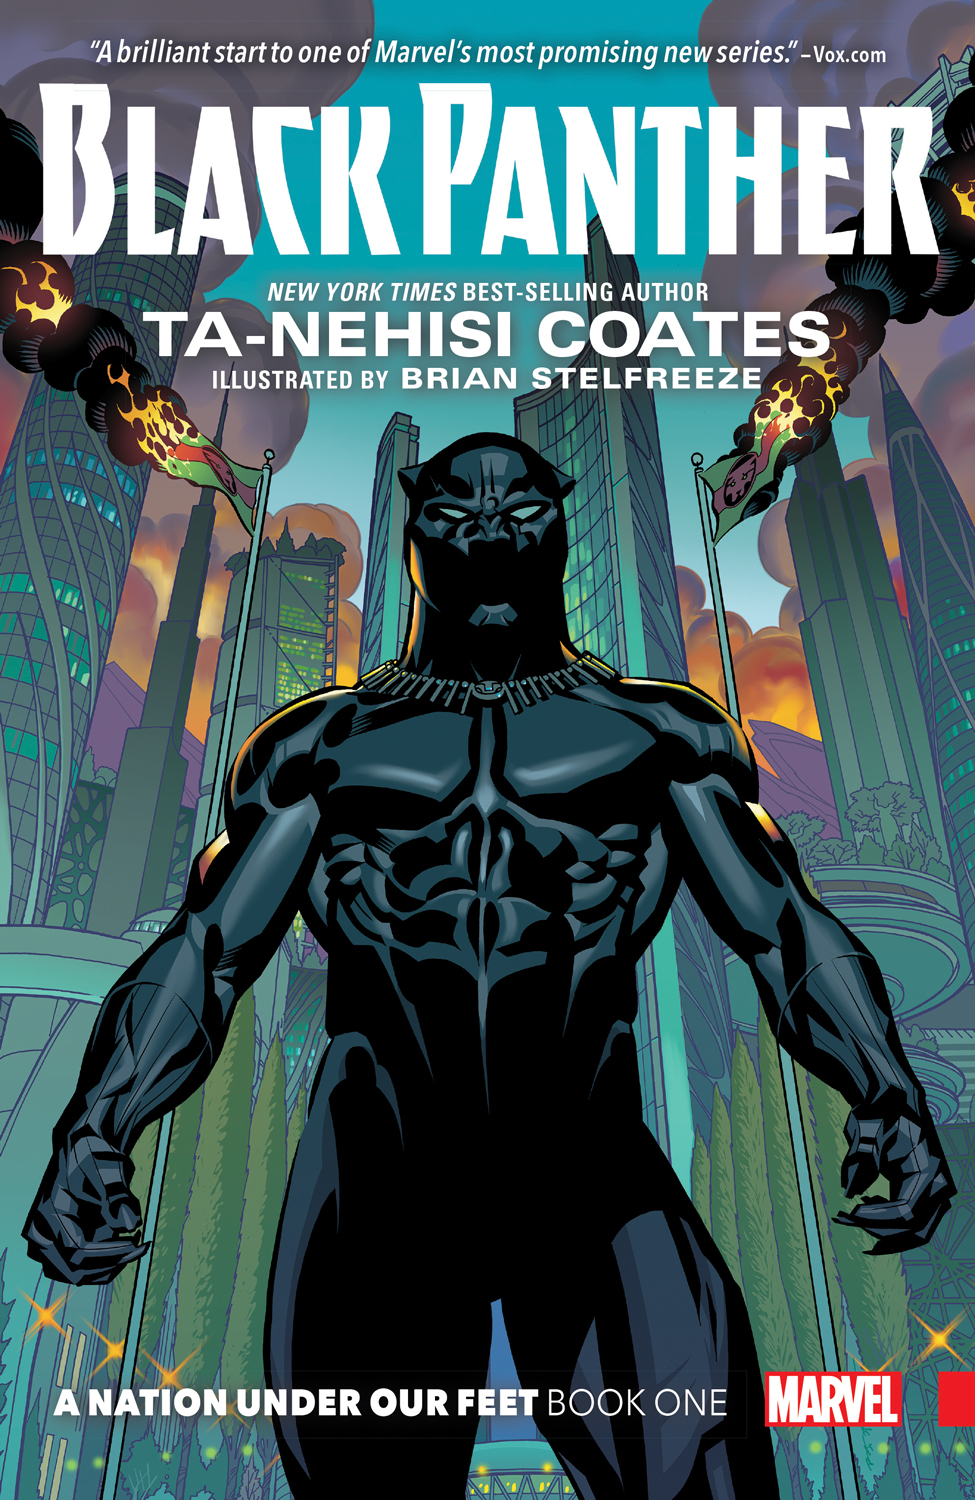 Black_Panther_A_Nation_Under_Our_Feet_Book_1_Cover